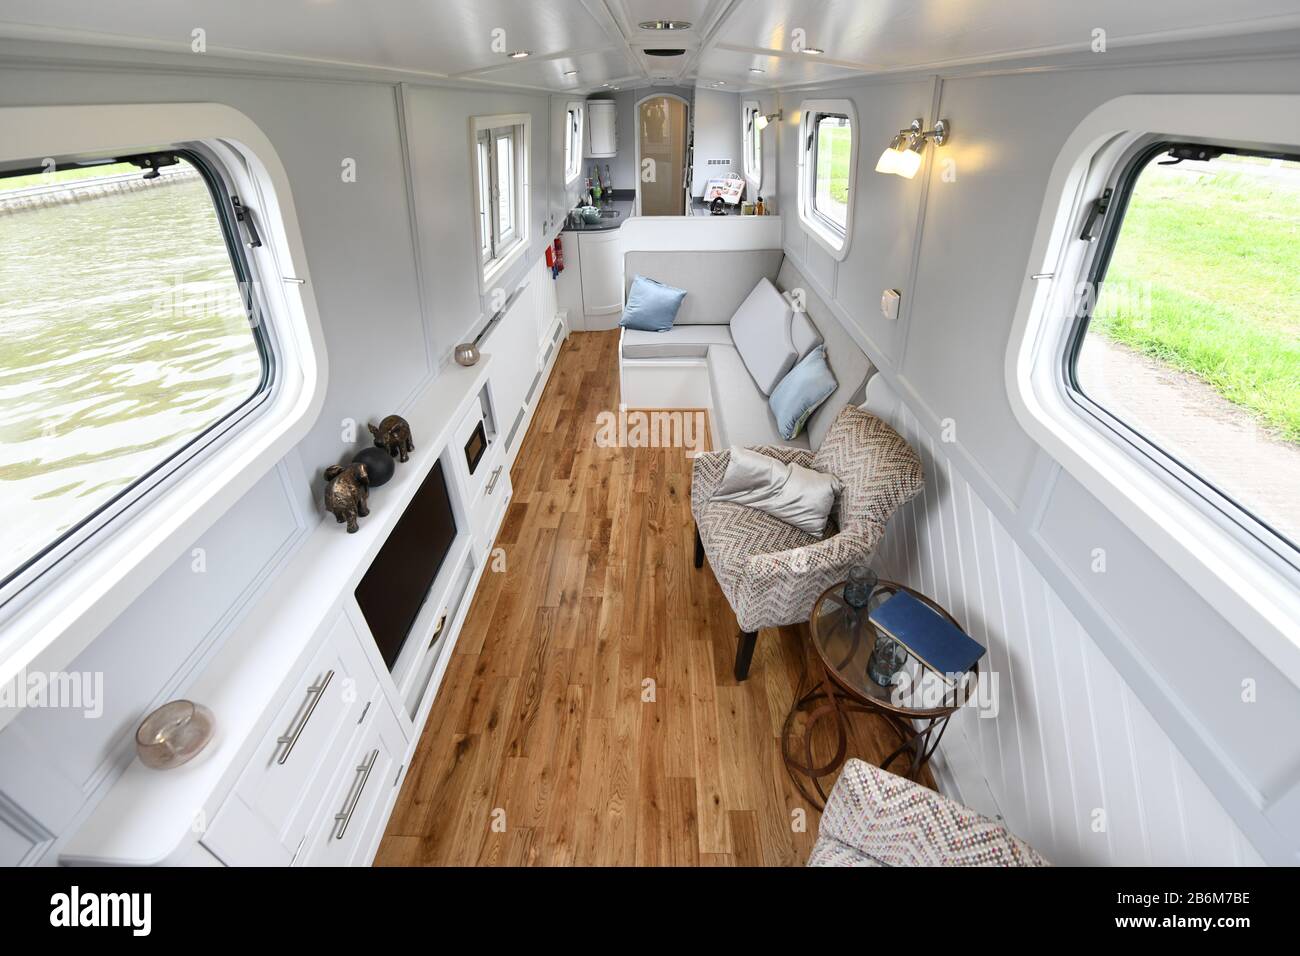 Looking into the main living area of a predominantly white coloured interior of a stylish new narrowboat on a canal. Stock Photo